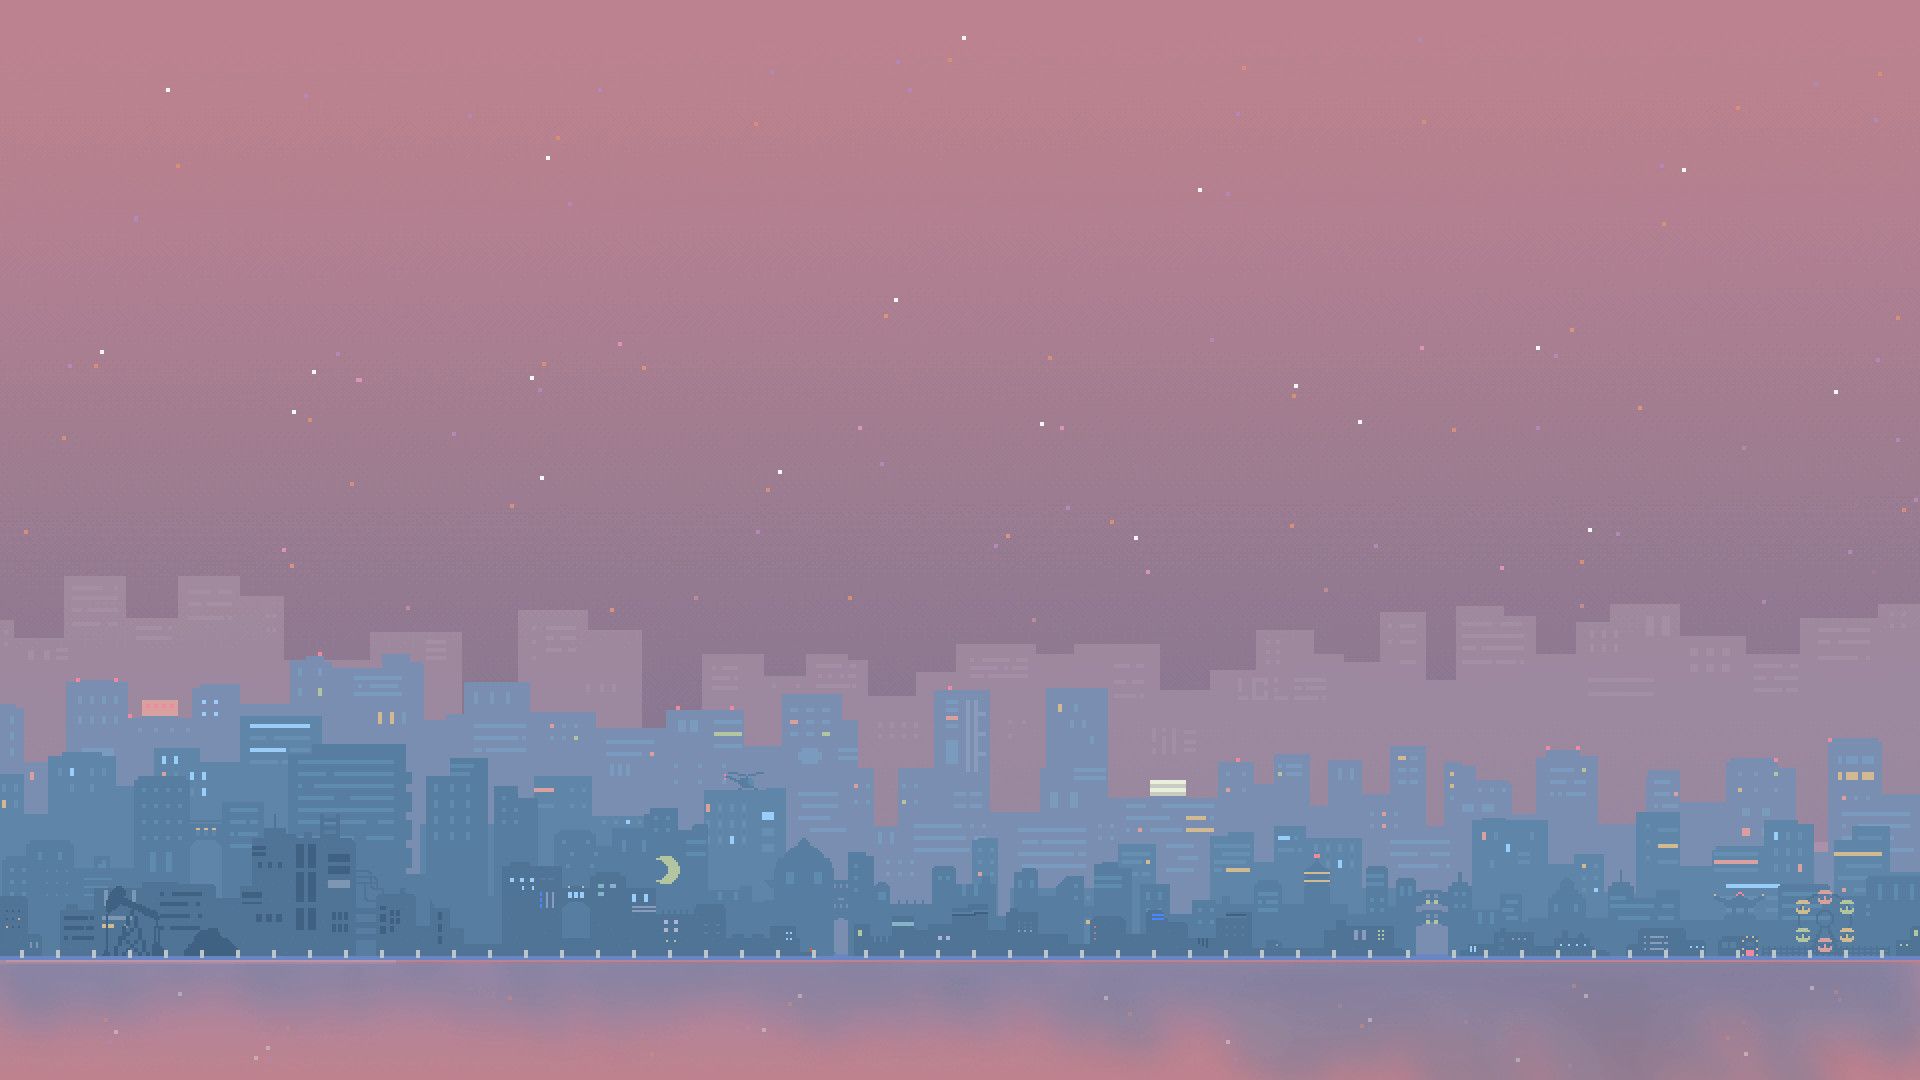 Aesthetic Pixel Art HQ Backgrounds Wallpapers 49285.